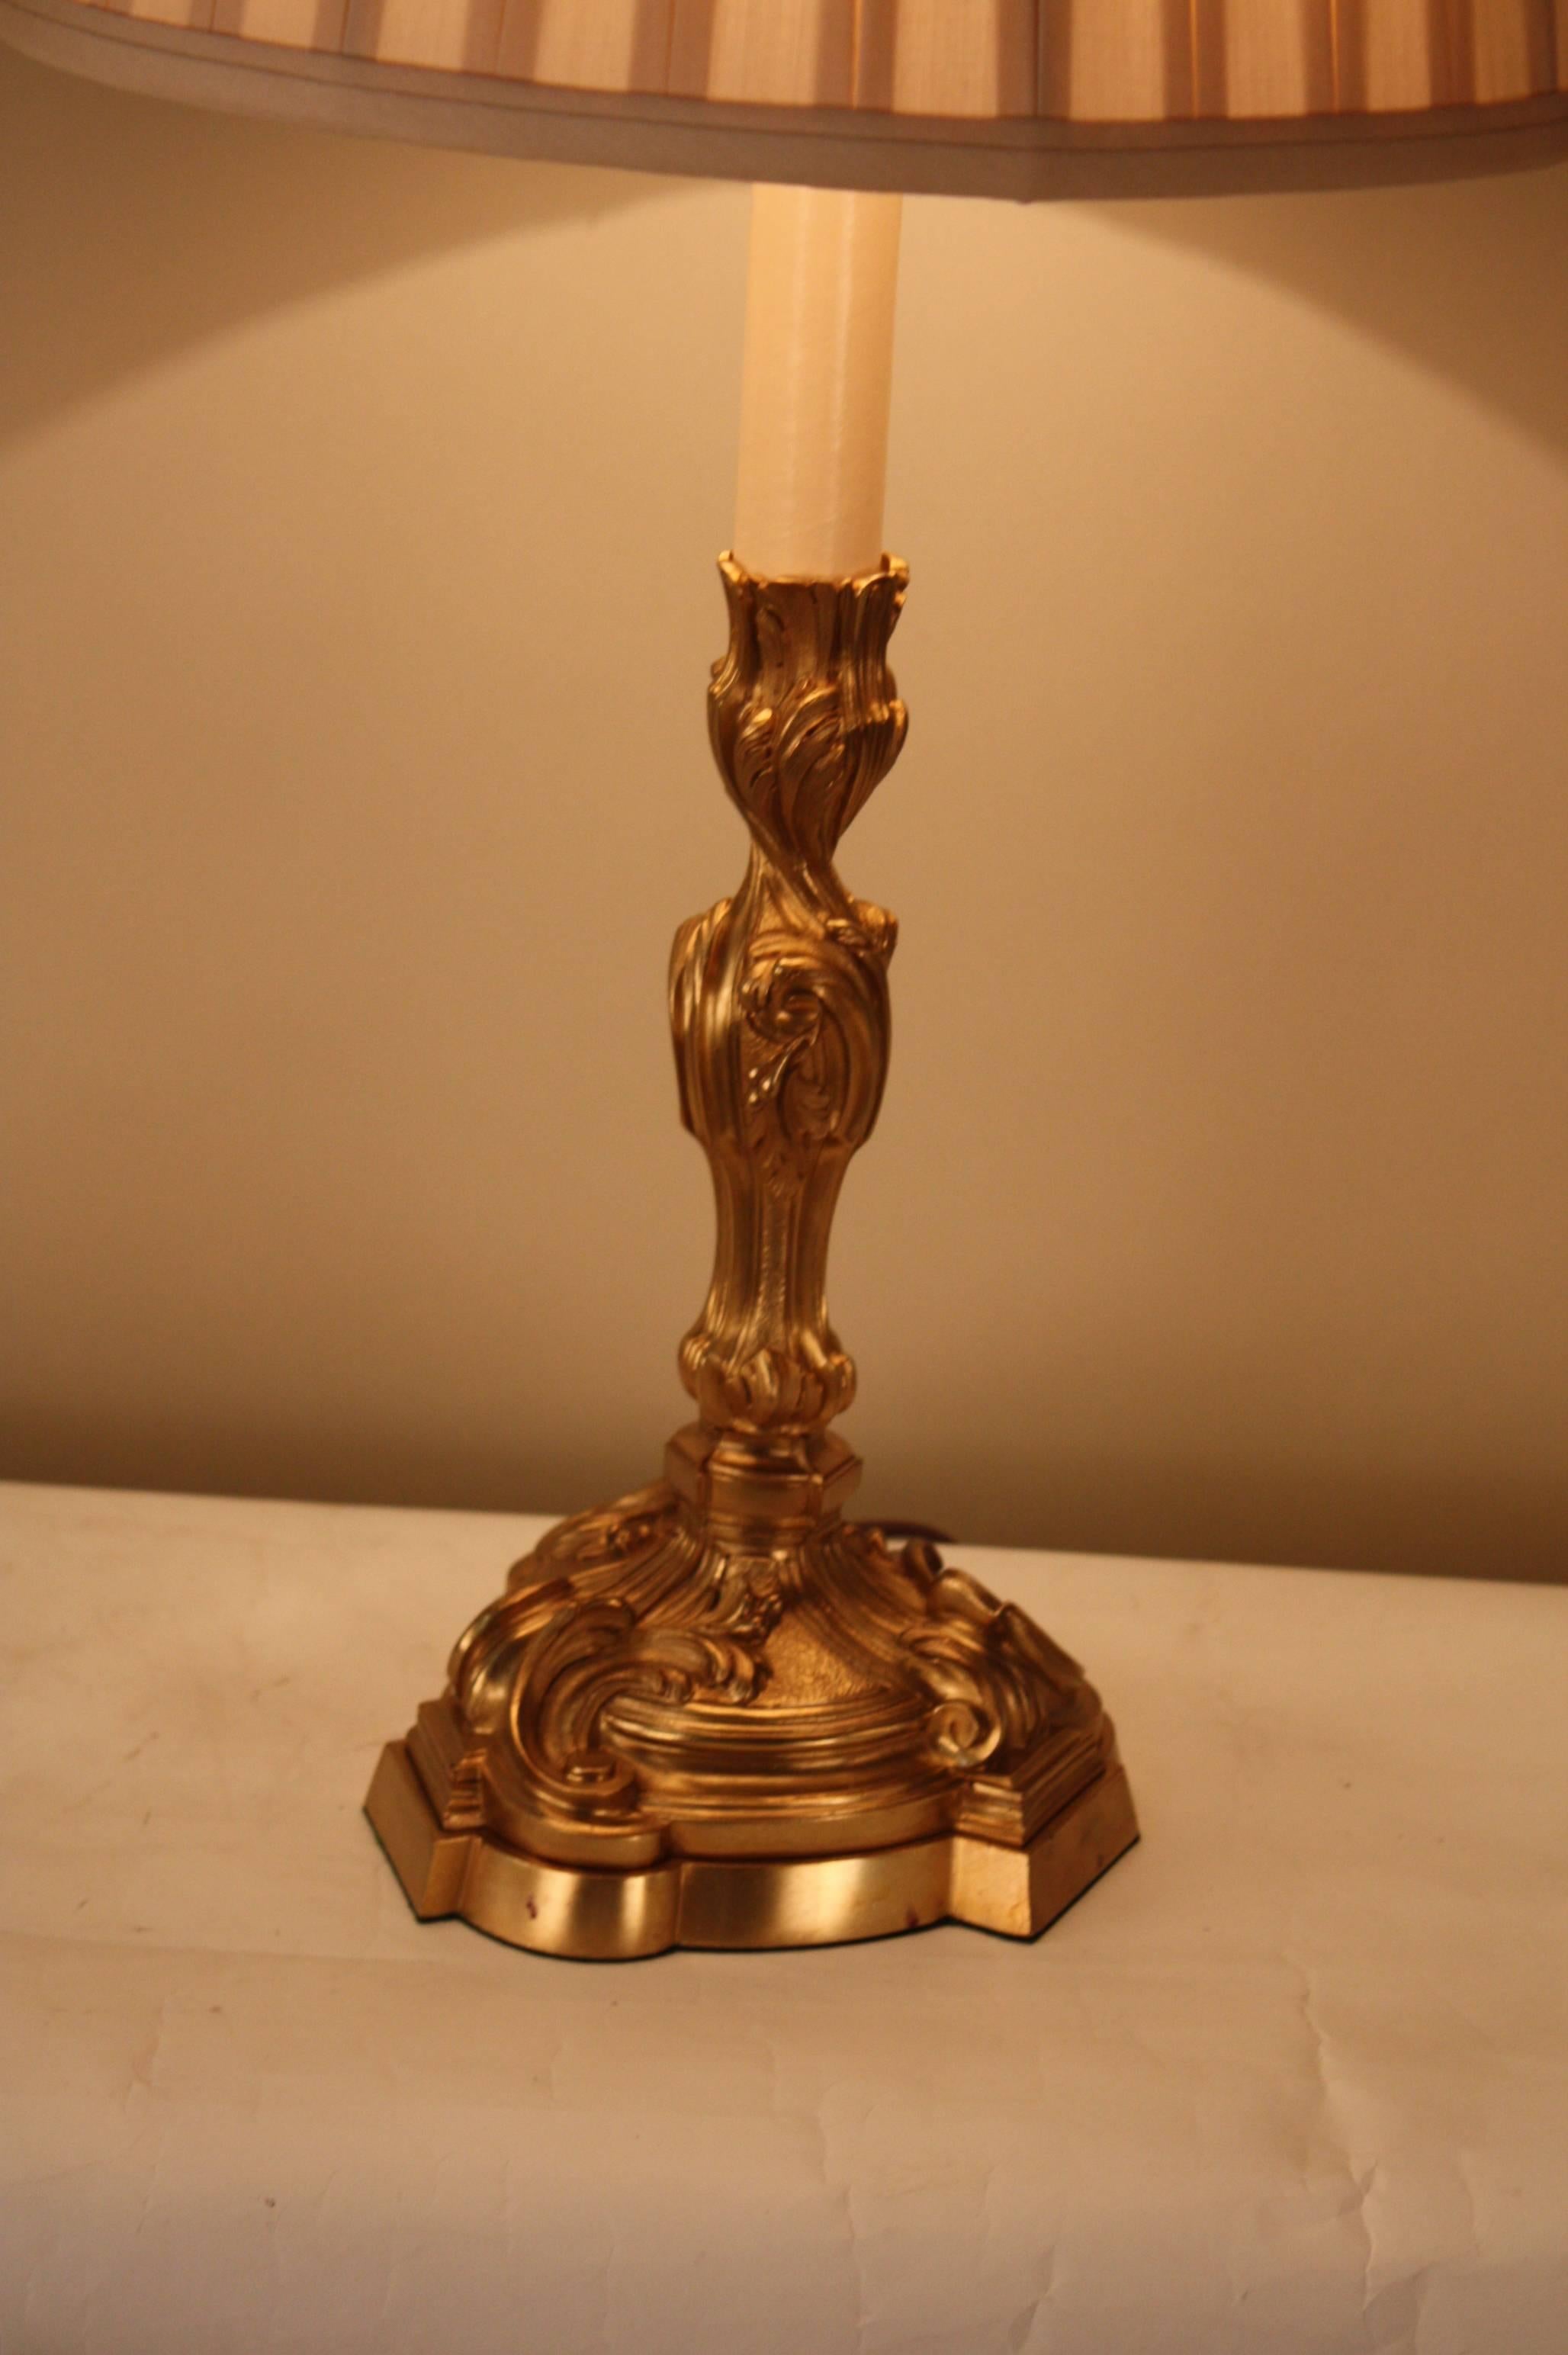 A fabulous Art Nouveau table lamp customized from a bronze candlestick with great detail work and design and fitted with handmade box pleated silk lampshade.